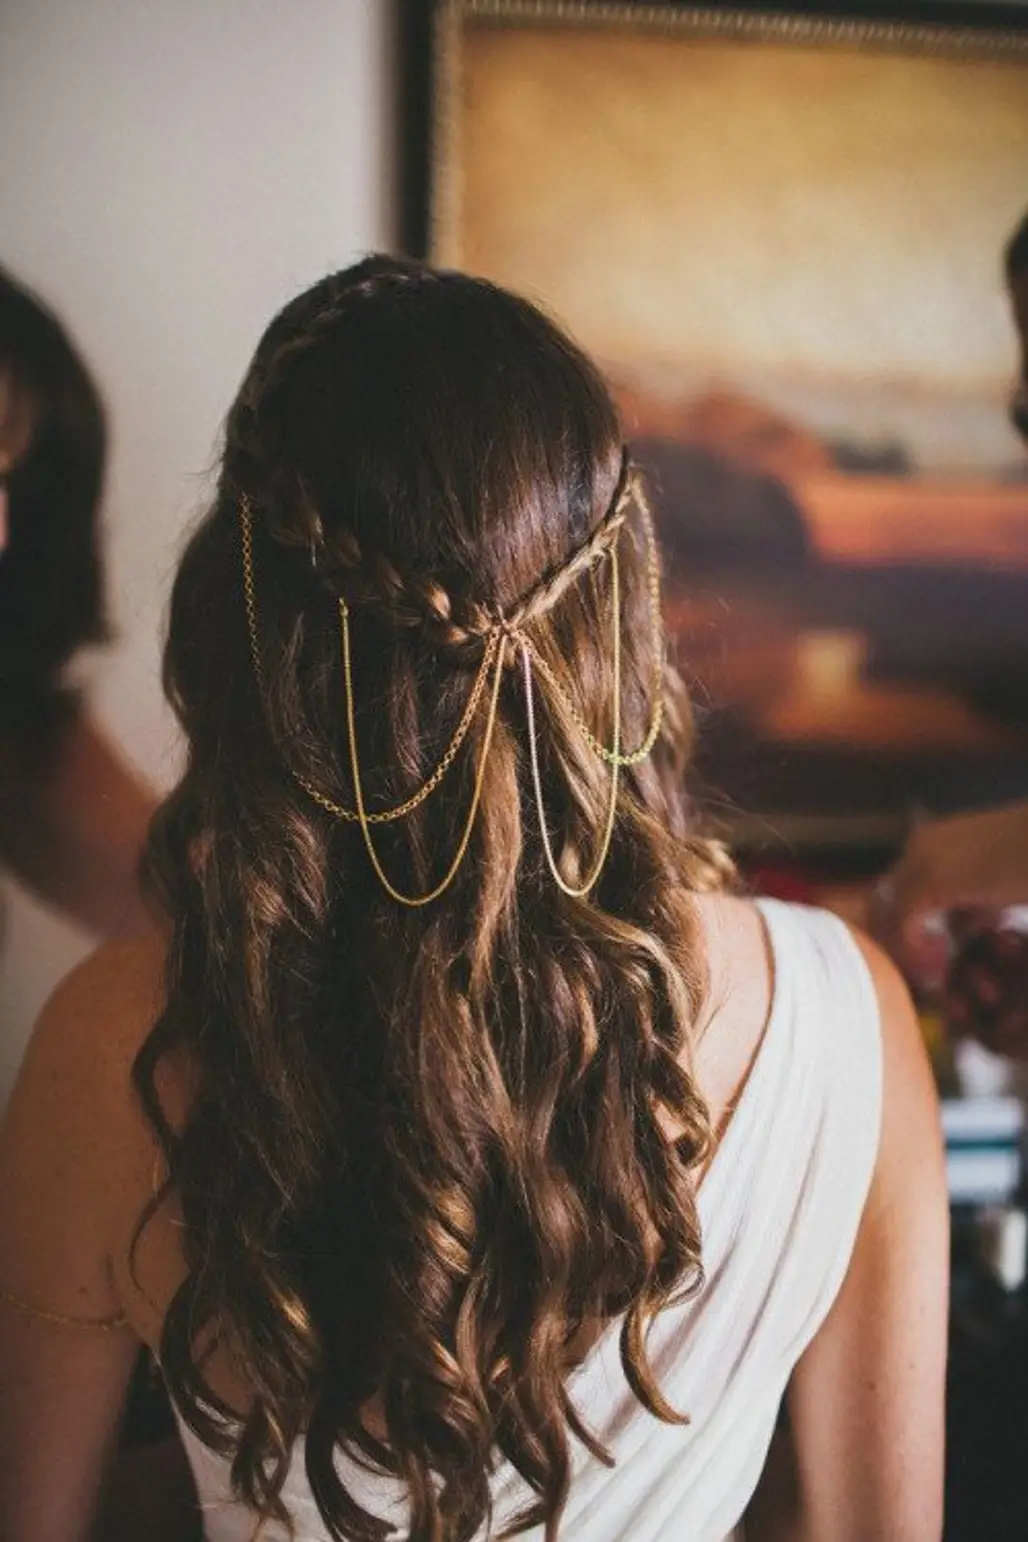 Hair Jewelry is Something Really Fun to Try